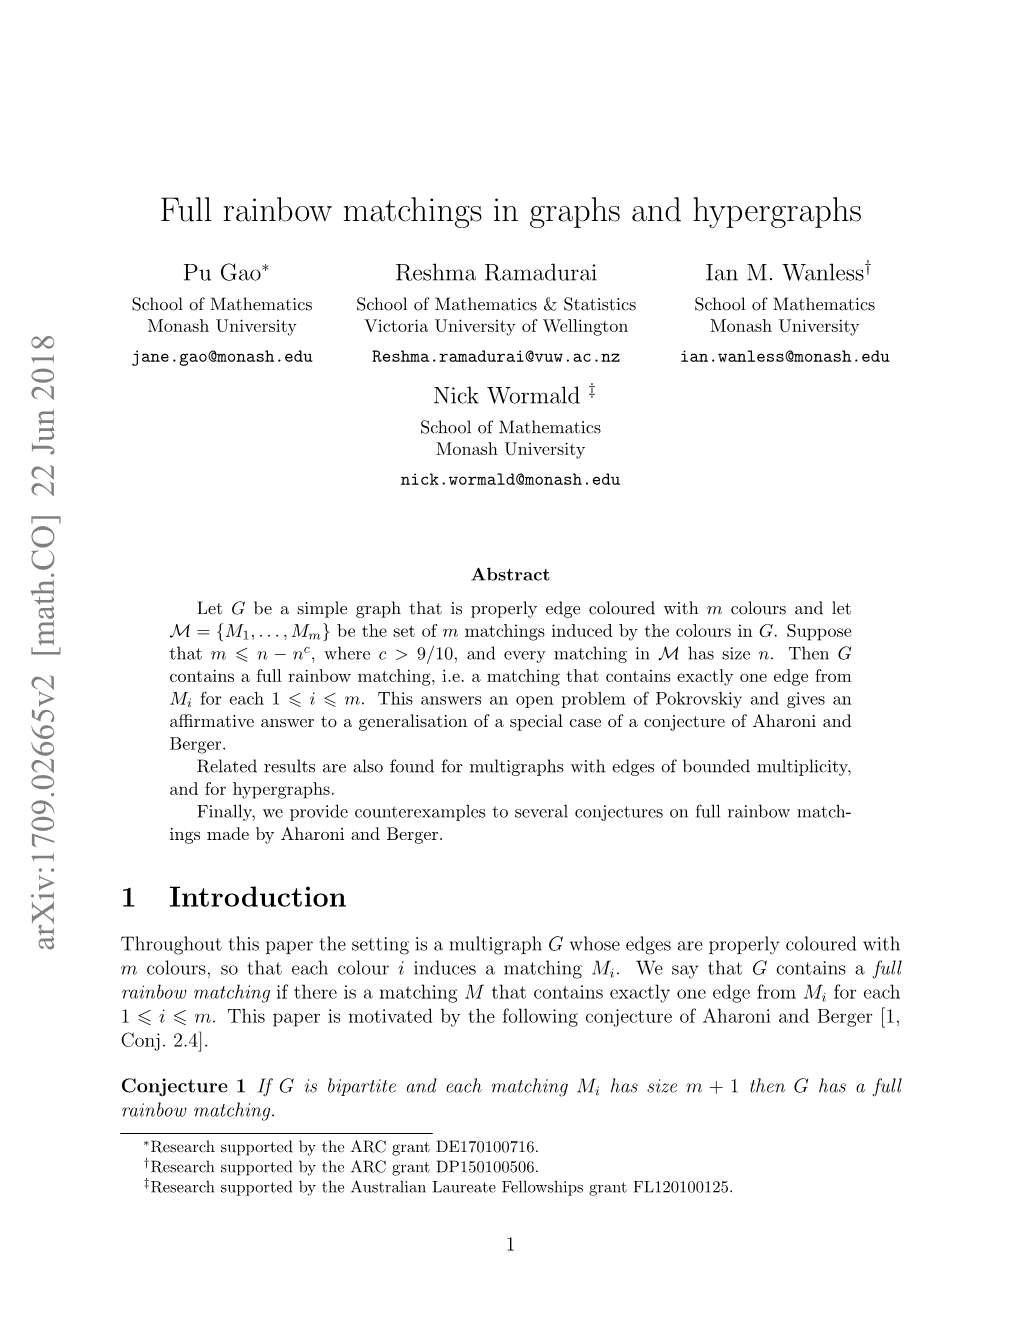 Full Rainbow Matchings in Graphs and Hypergraphs Arxiv:1709.02665V2